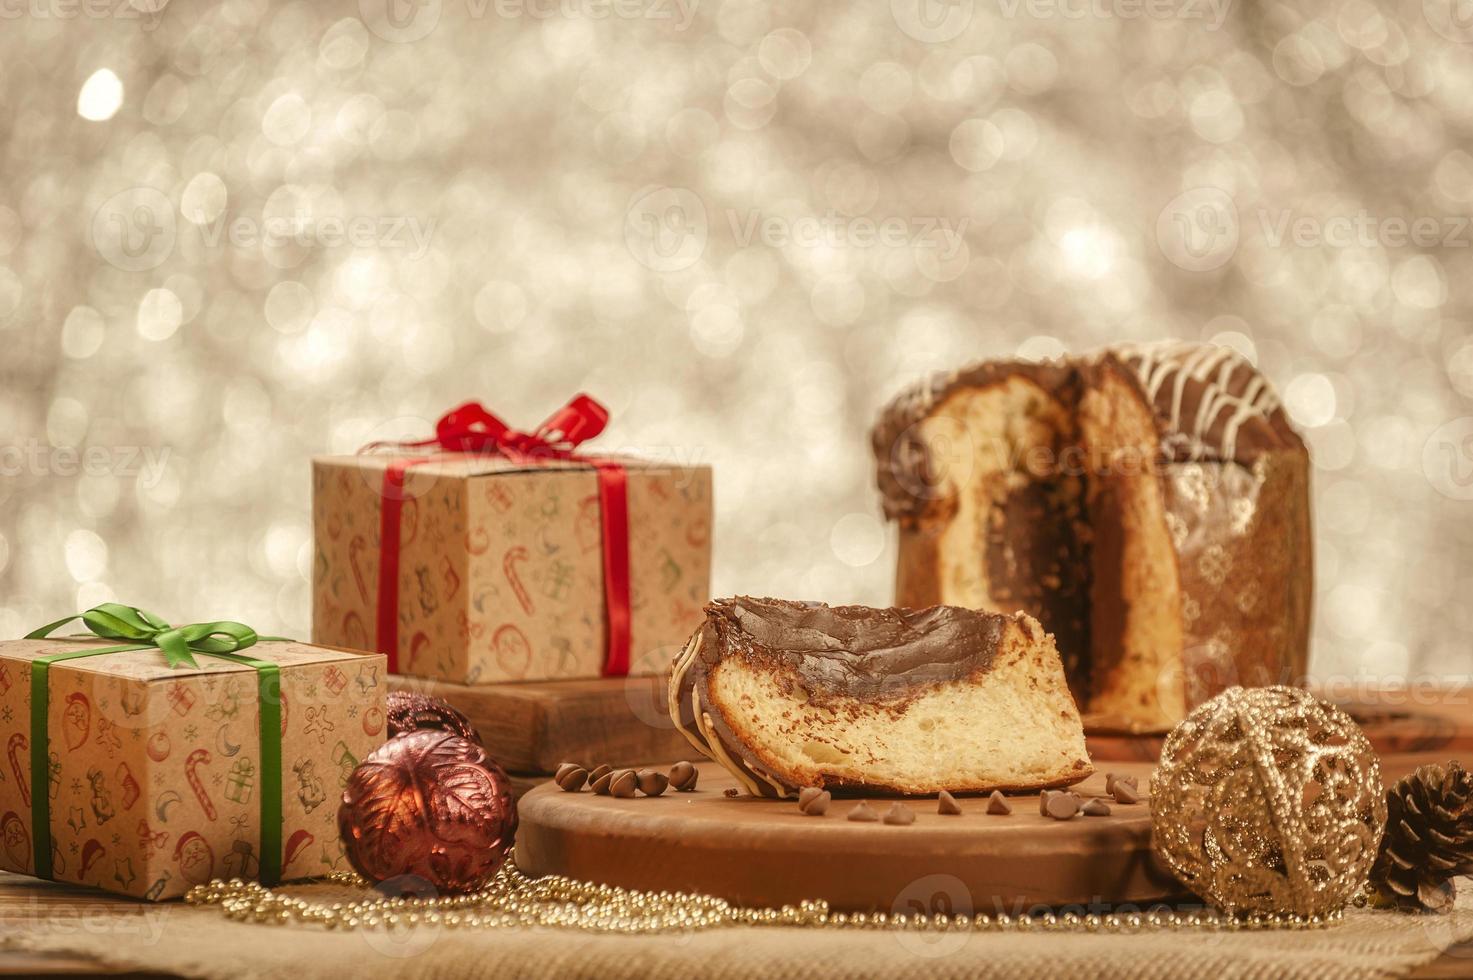 Slice of chocolate panettone  on wooden cutting board with christmas ornaments photo